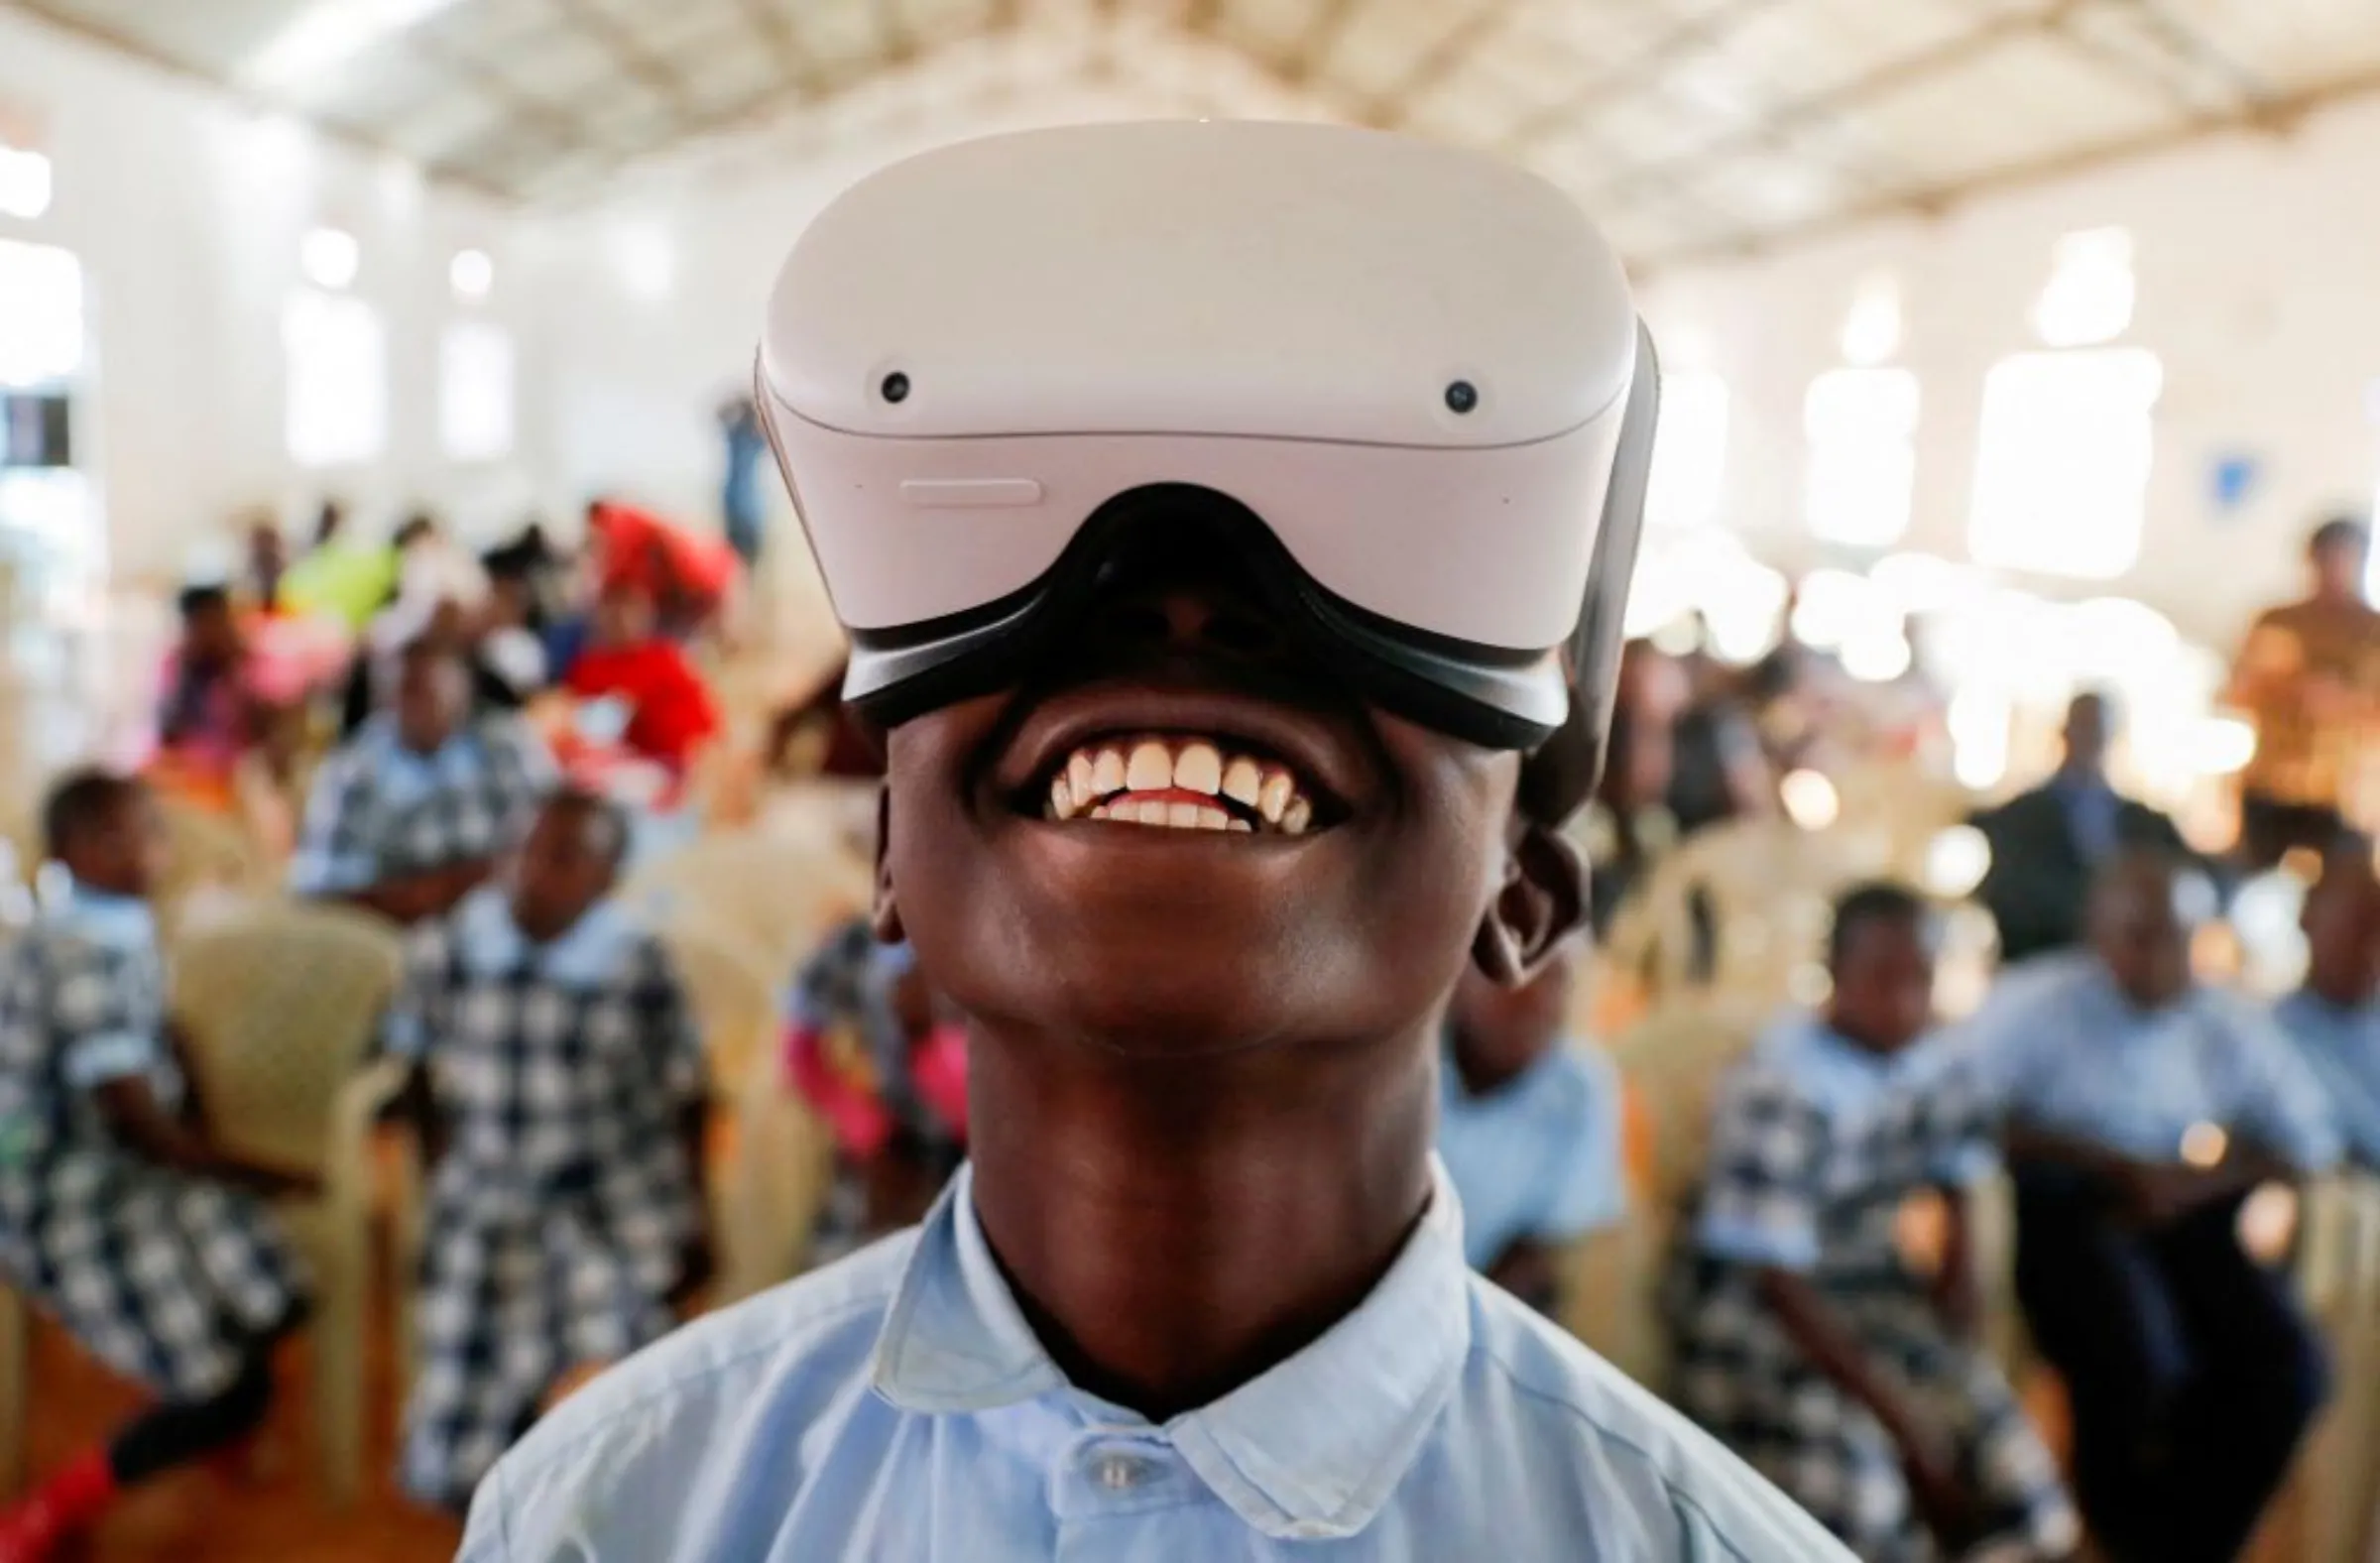 A boy uses an Oculus virtual reality (VR) headset, to virtually visit Buckingham Palace during the celebration of Britain's Queen Elizabeth's Platinum Jubilee, in Nyeri, Kenya June 2, 2022